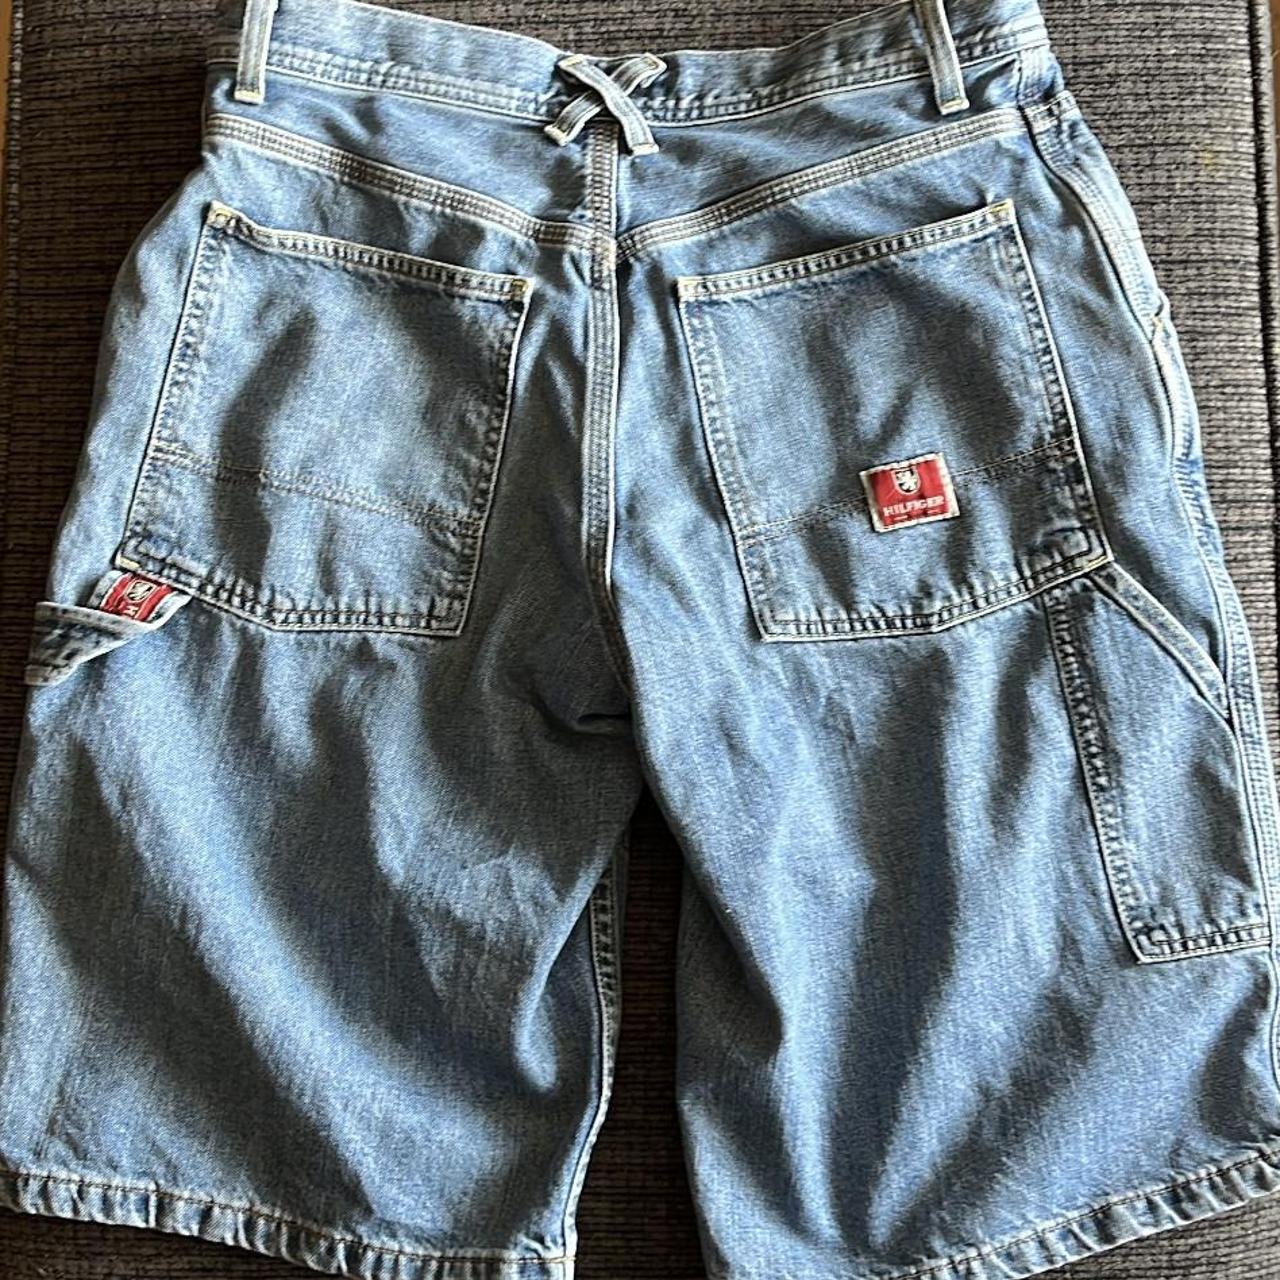 Product Image 1 - Hilfiger Jorts
Lightly worn, no stains